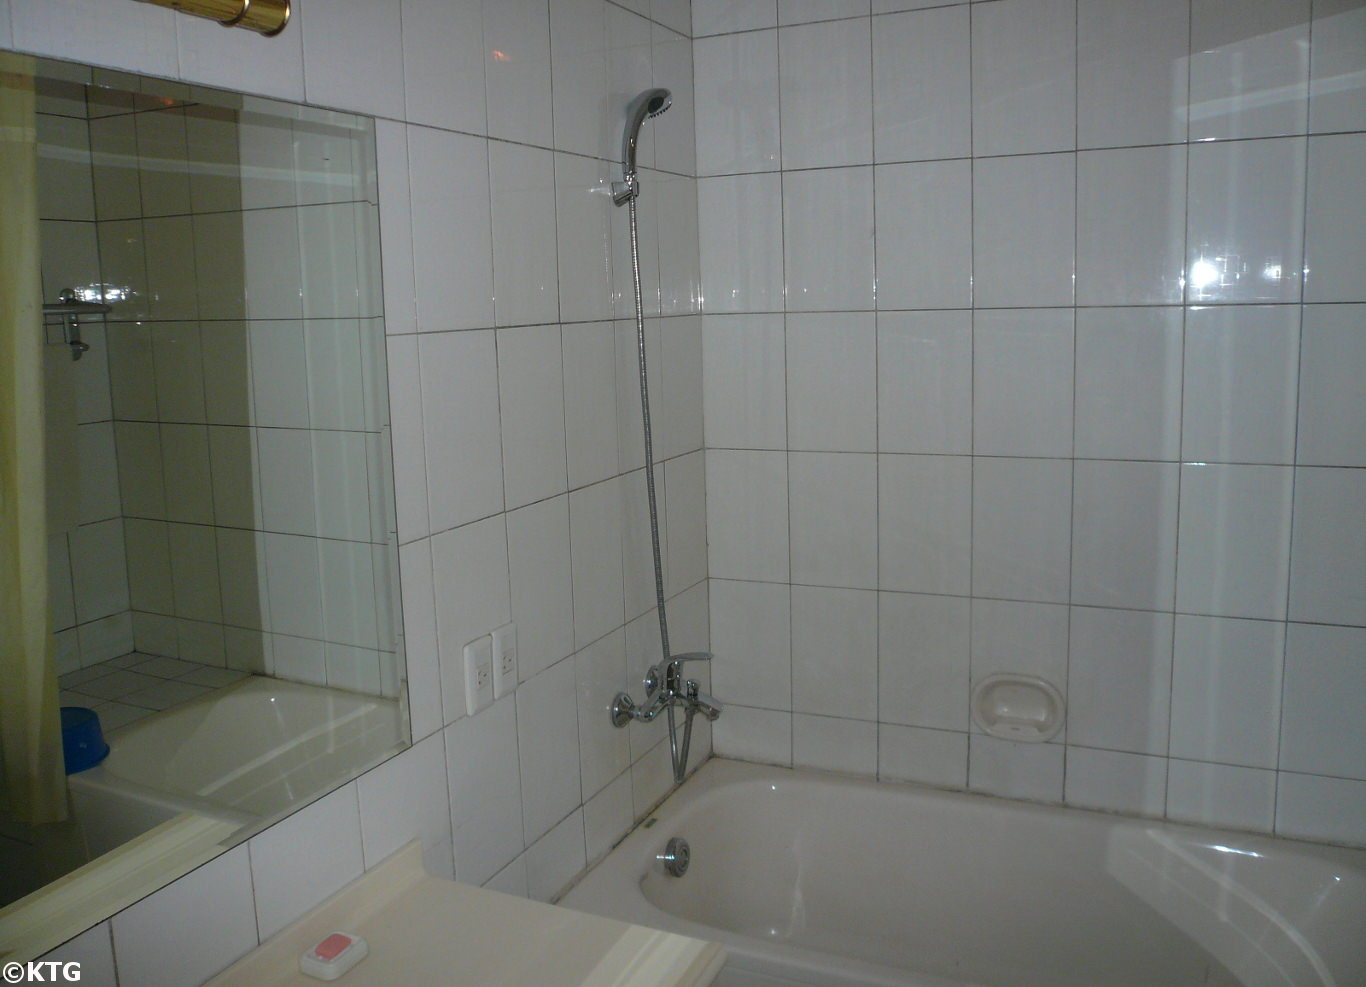 Bathroom in a standard room at the Songdowon Hotel in Wonsan city, Kangwon province, North Korea (DPRK). Trip arranged by KTG Tours